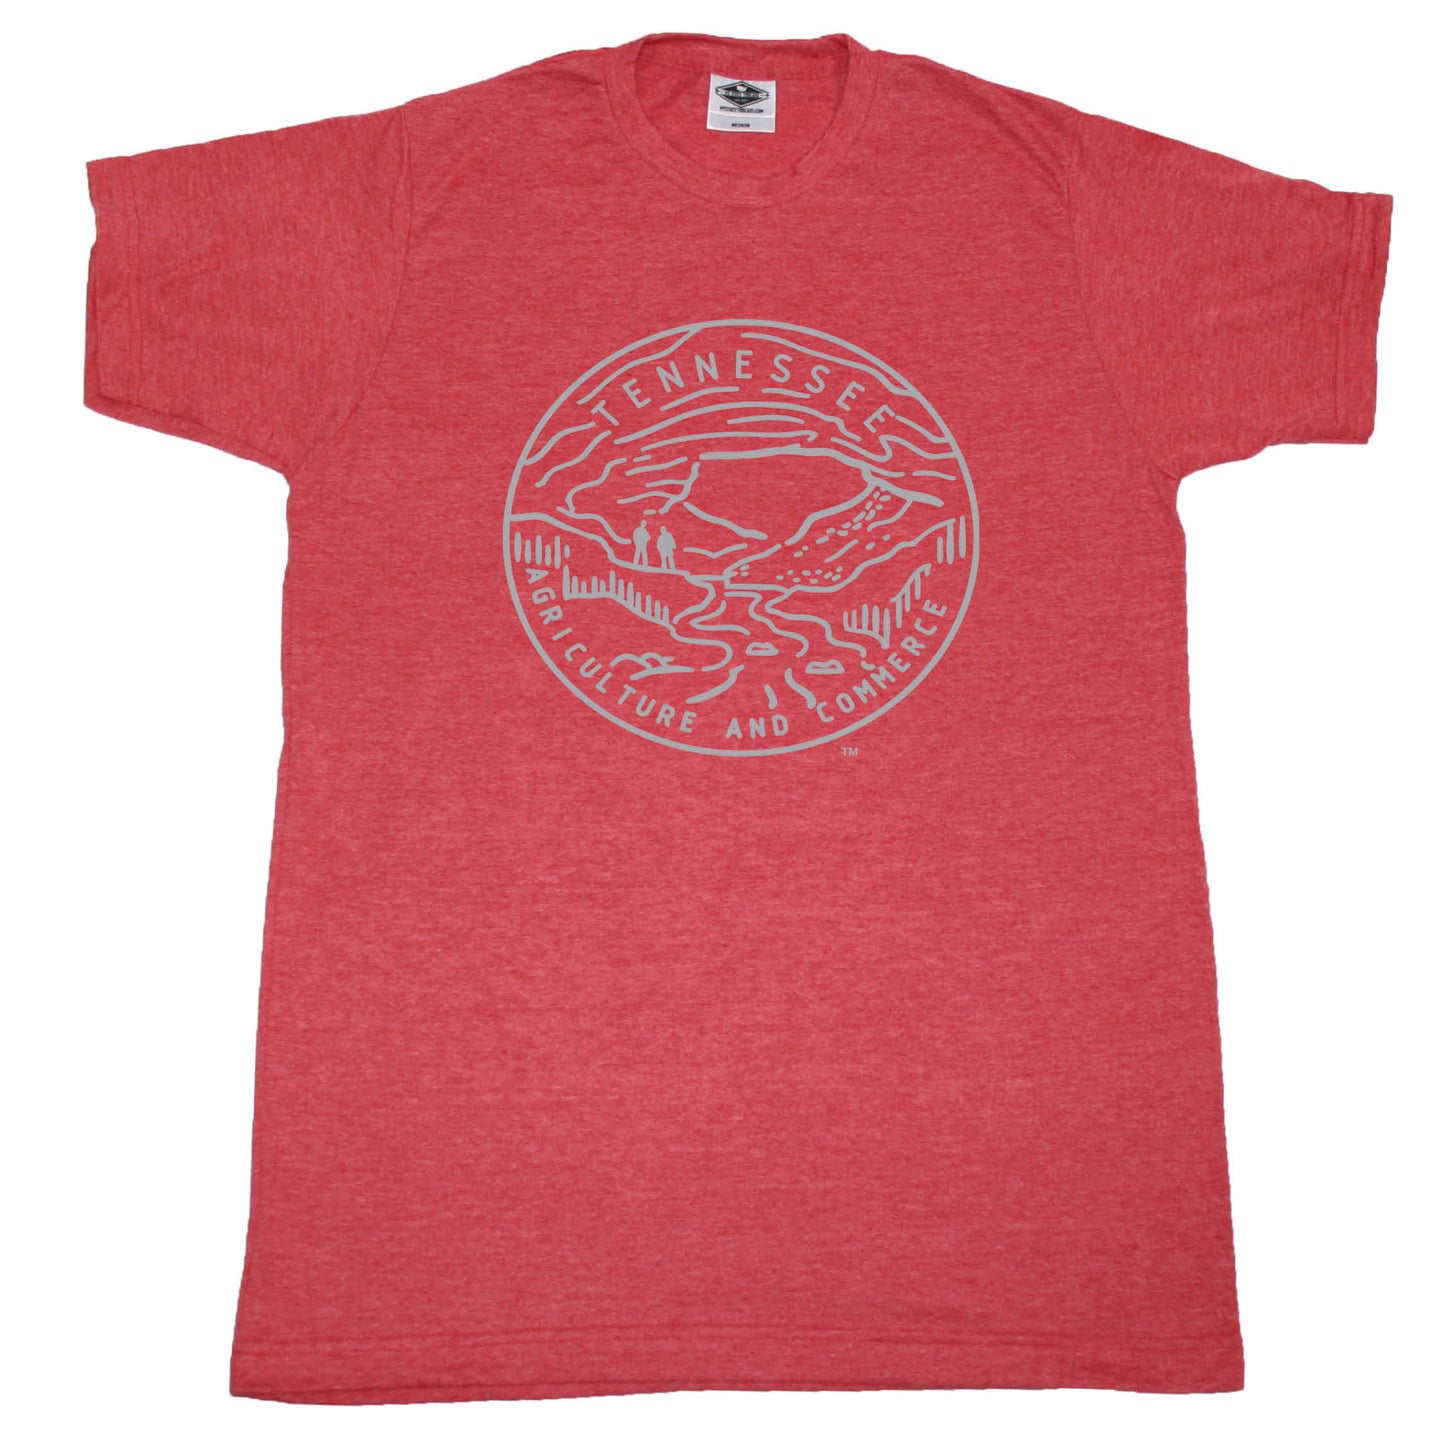 TENNESSEE RED TEE | STATE SEAL | AGRICULTURE AND COMMERCE